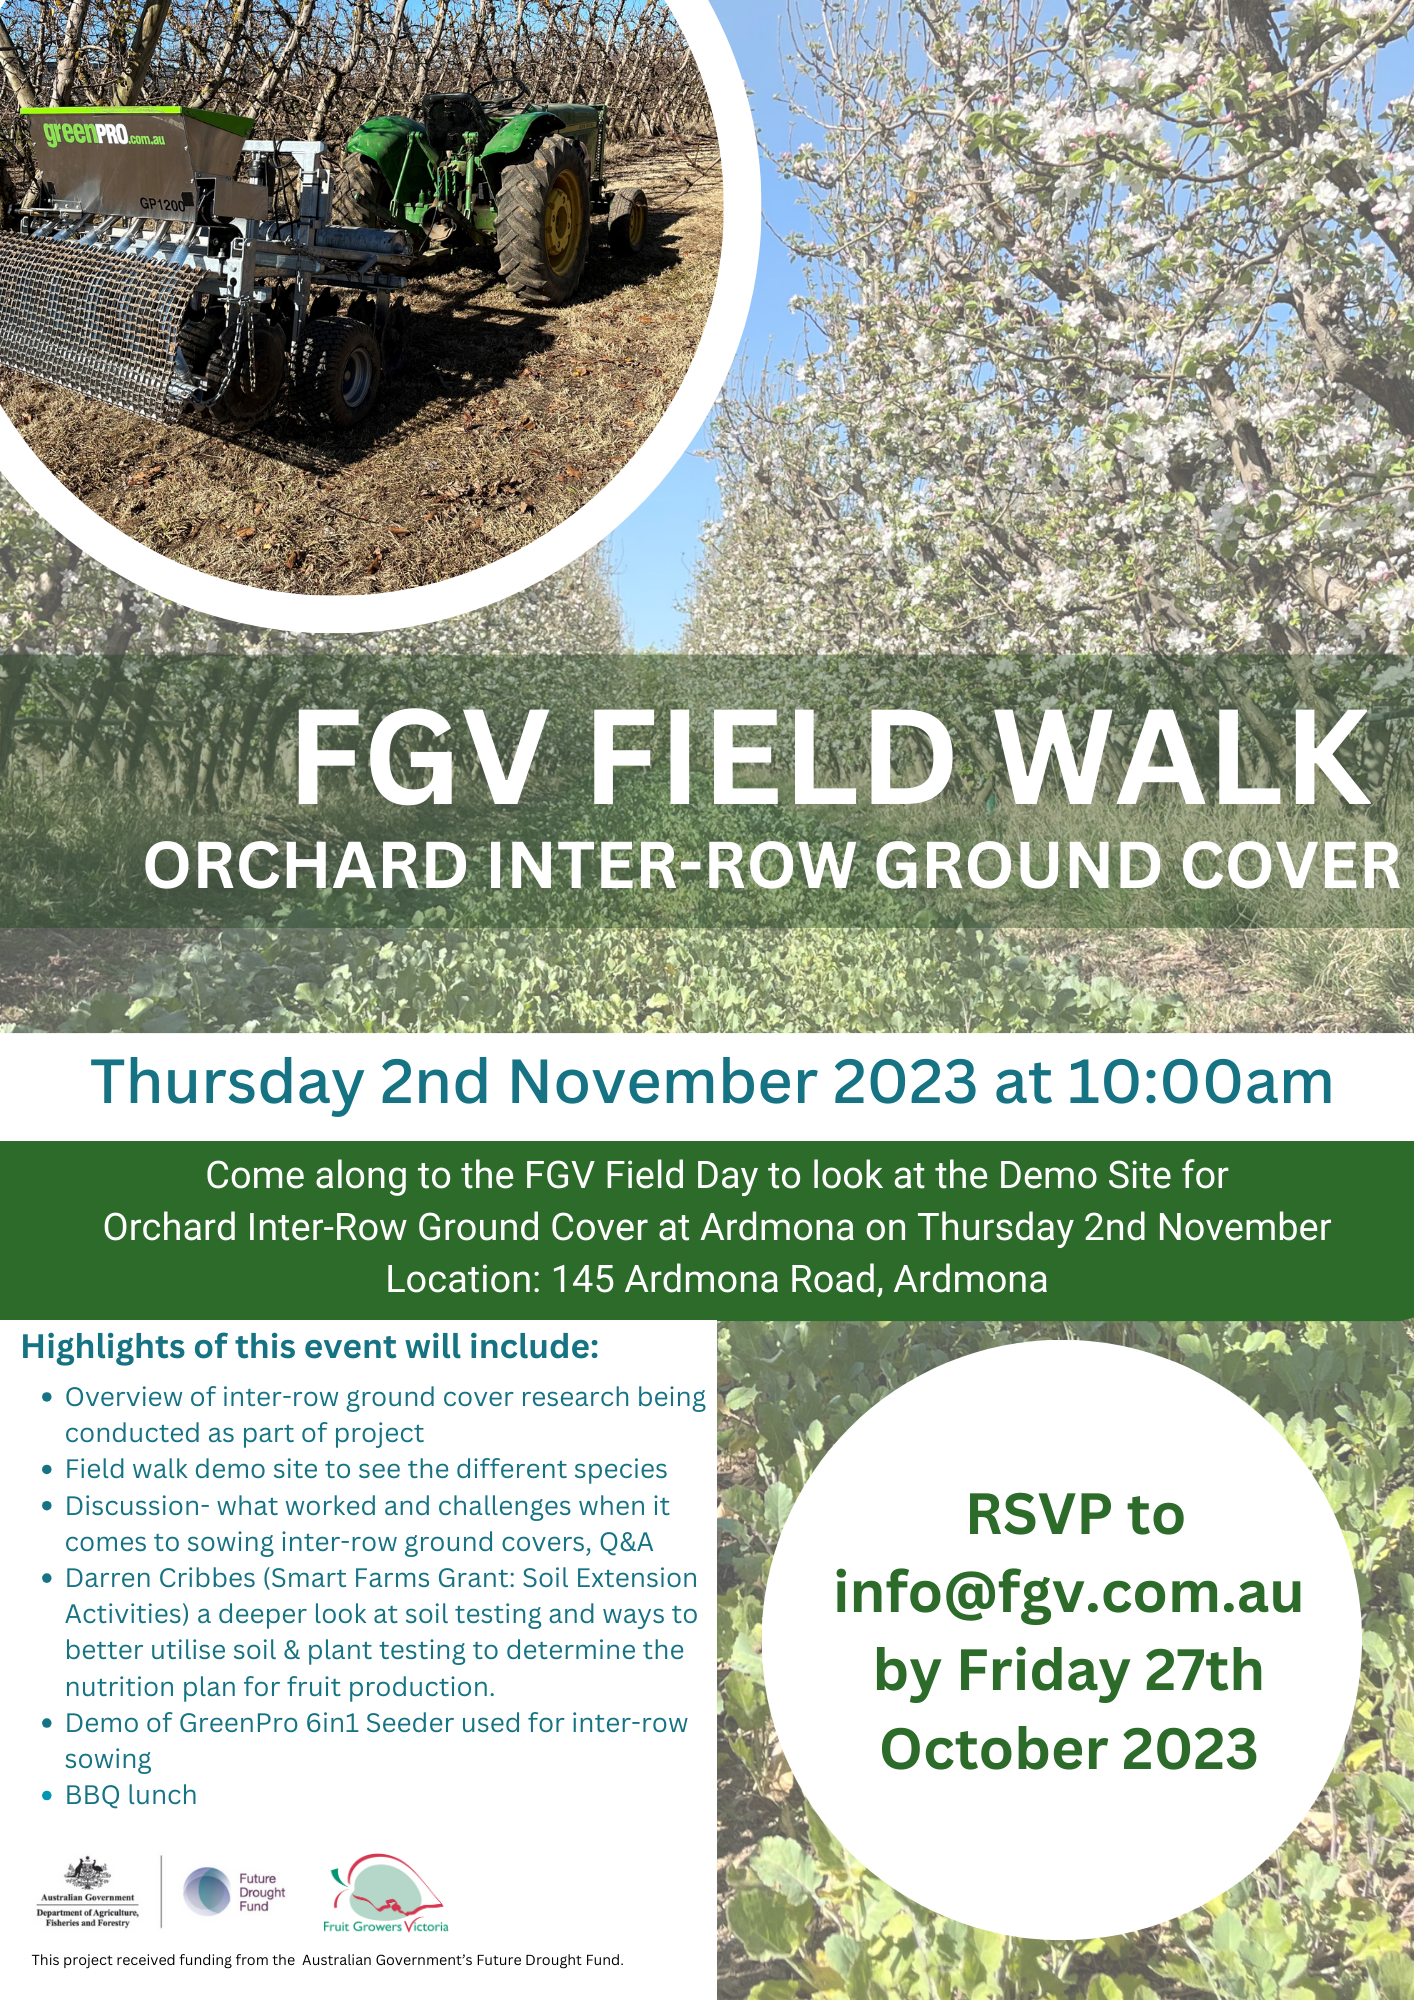 FGV Field Walk:  Orchard Inter-Row Ground Cover- Thursday 2nd November 2023 from 10am